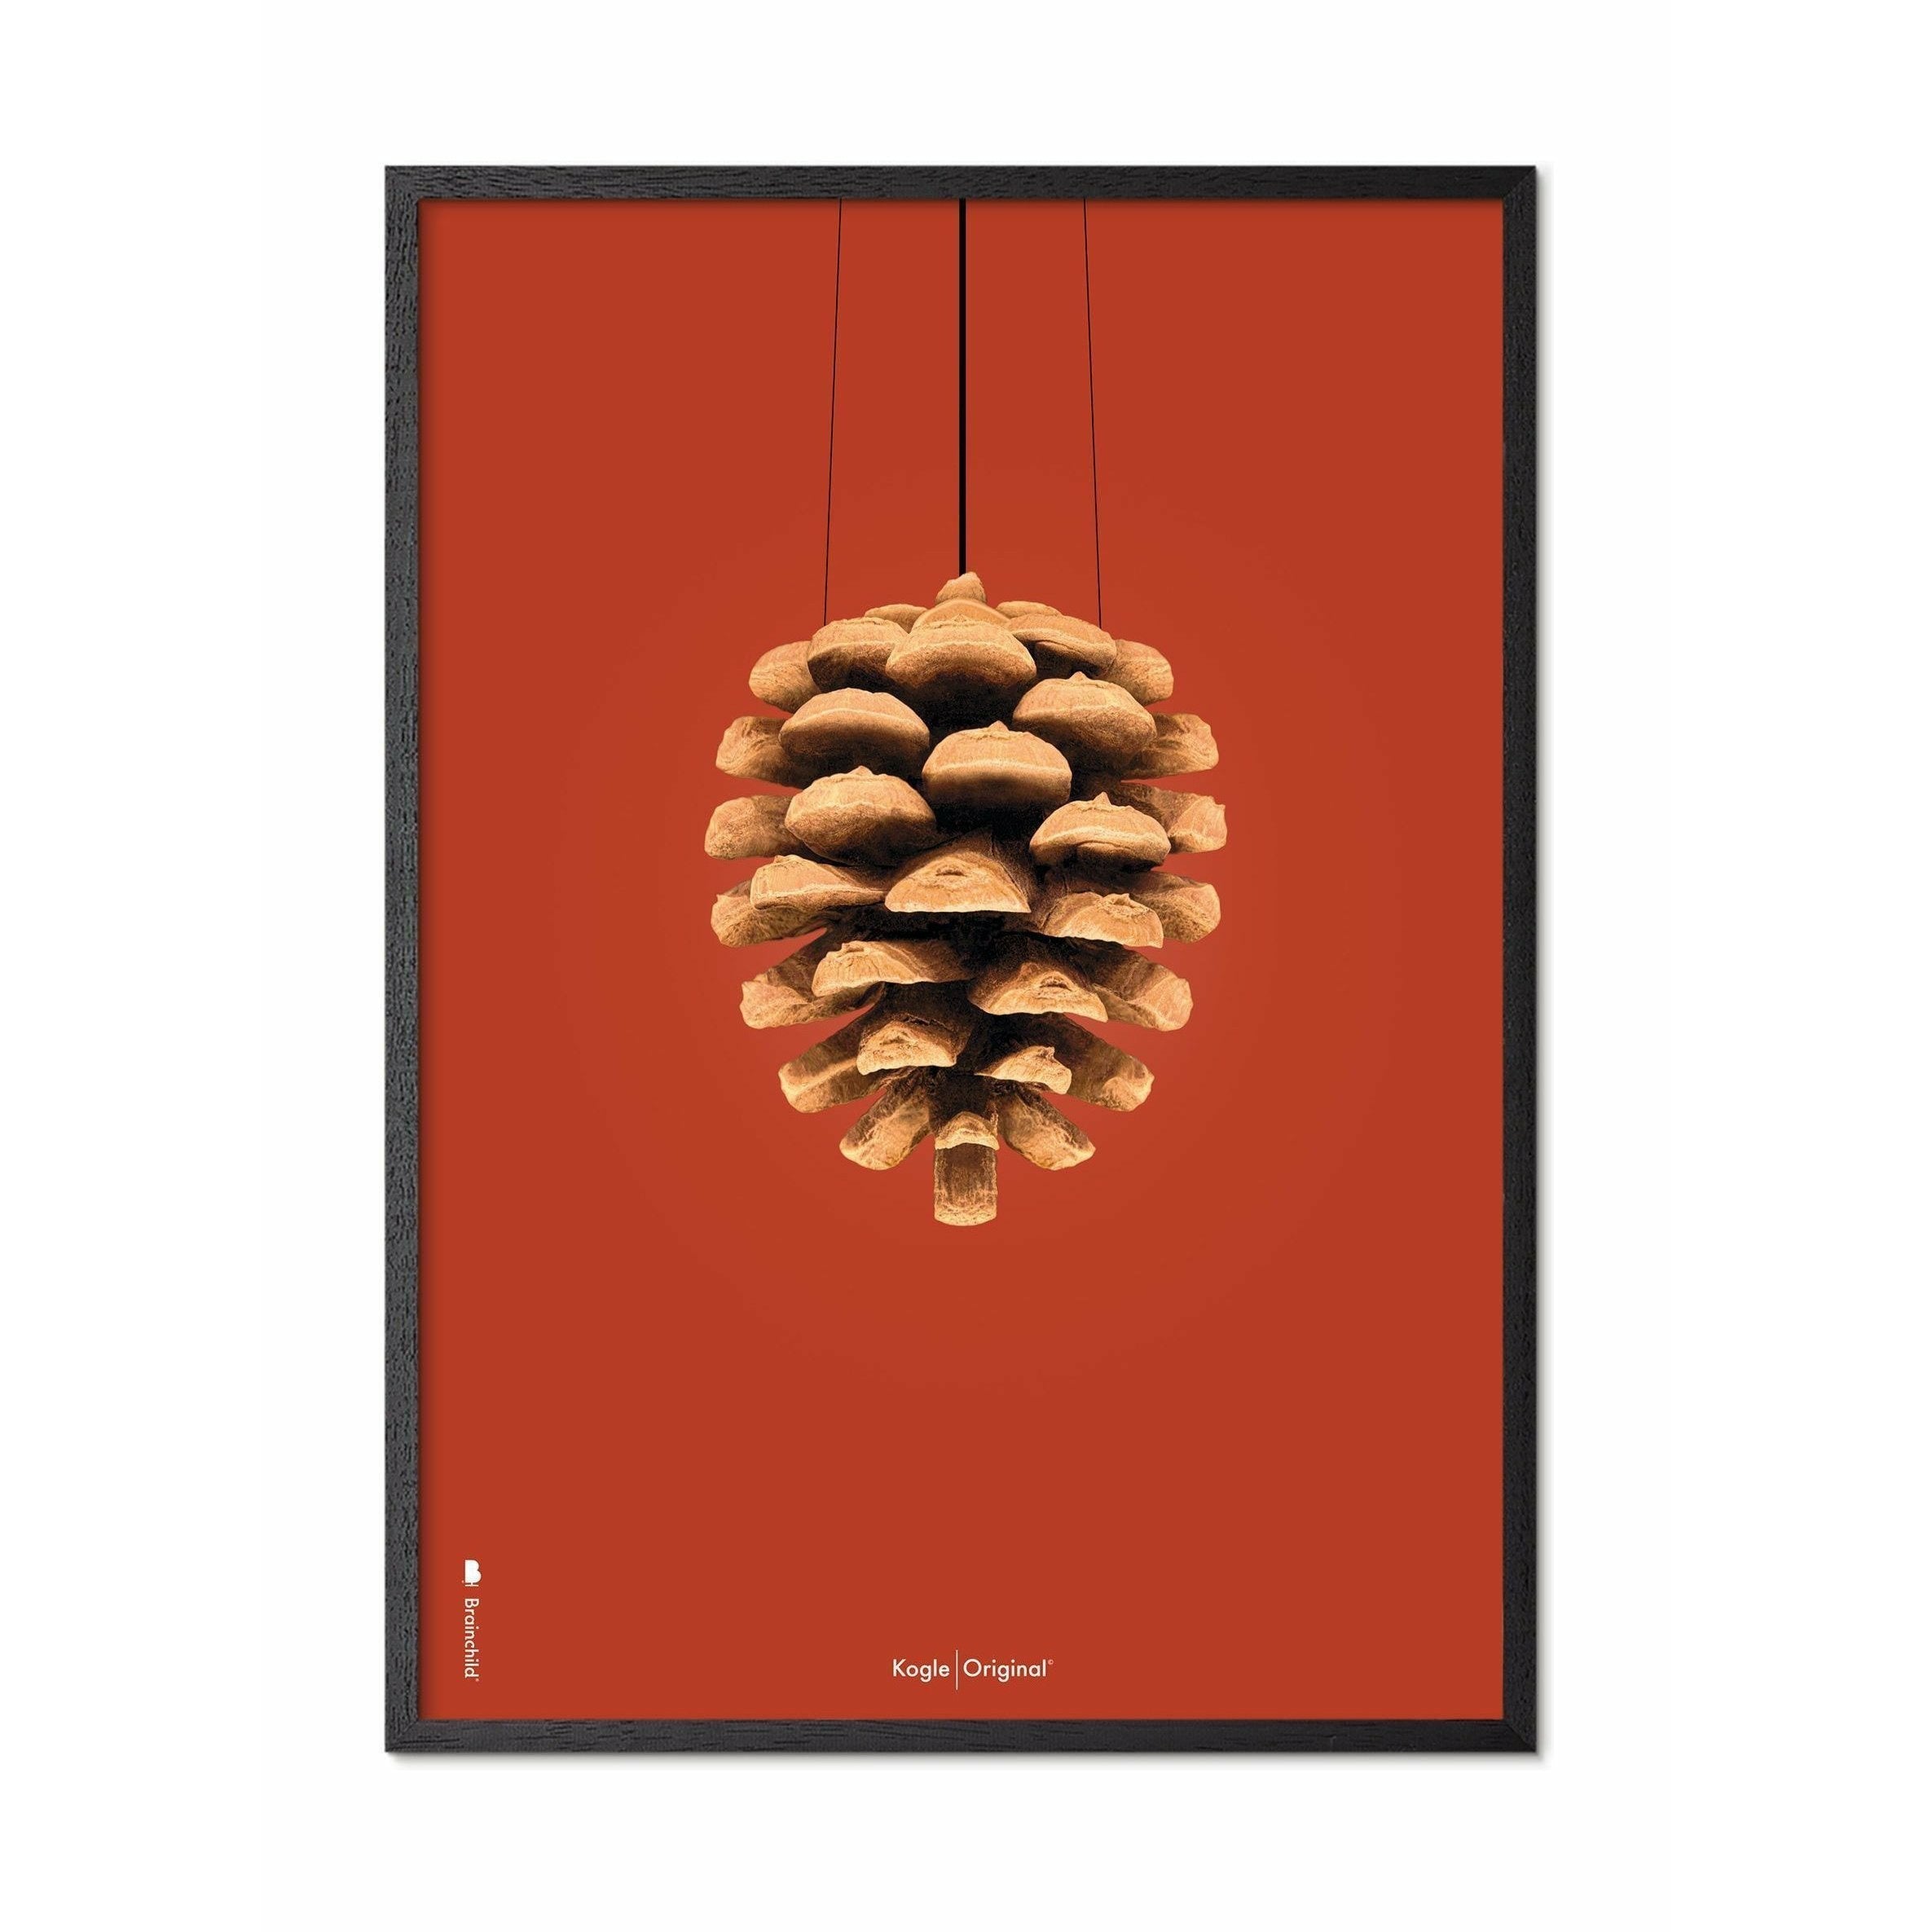 Brainchild Pine Cone Classic Poster, Frame In Black Lacquered Wood A5, Red Background